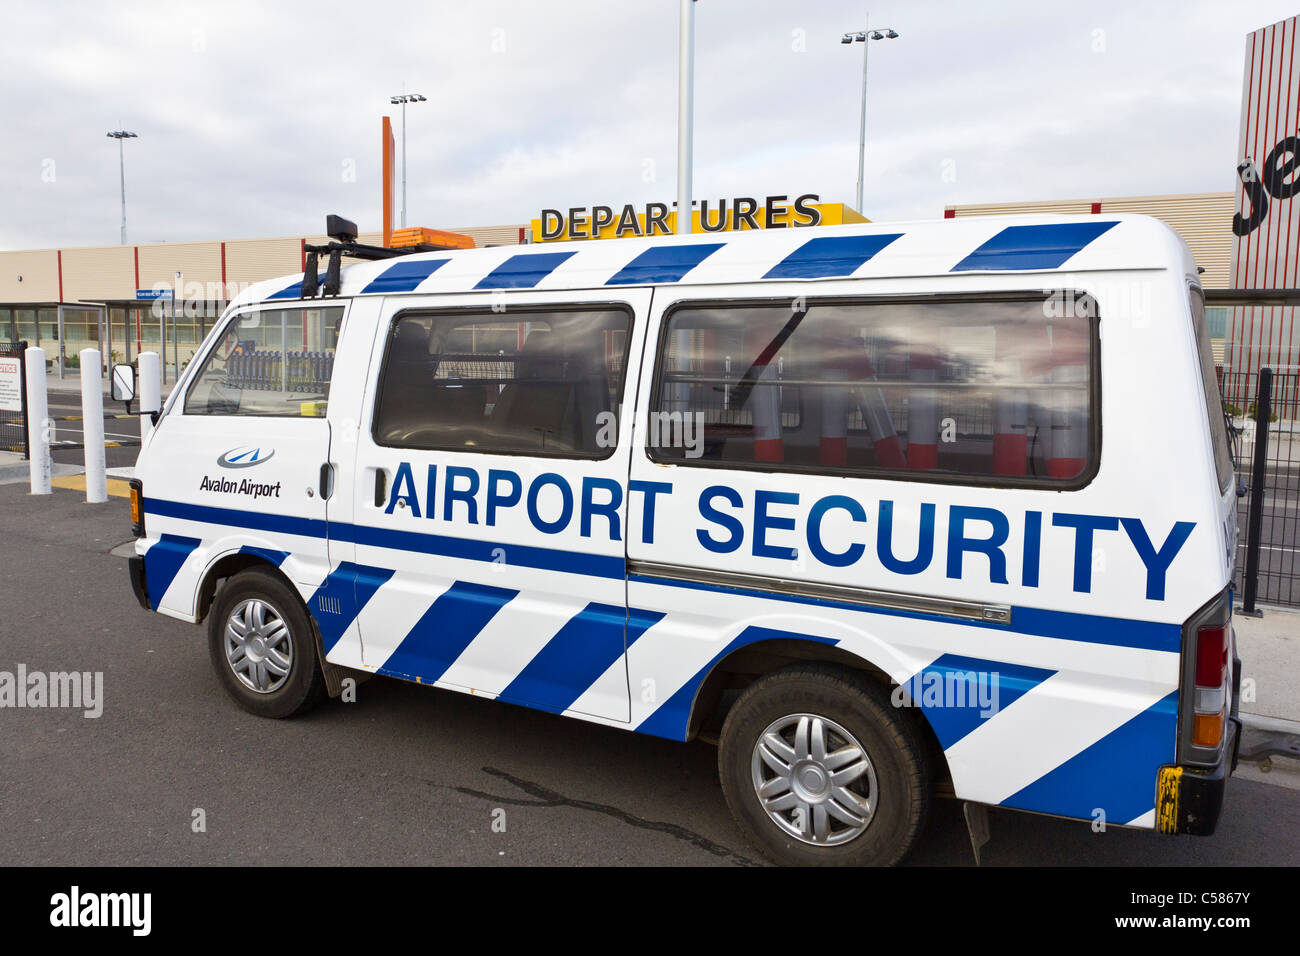 Airport Security van at Avalon Airfield Melbourne. Stock Photo